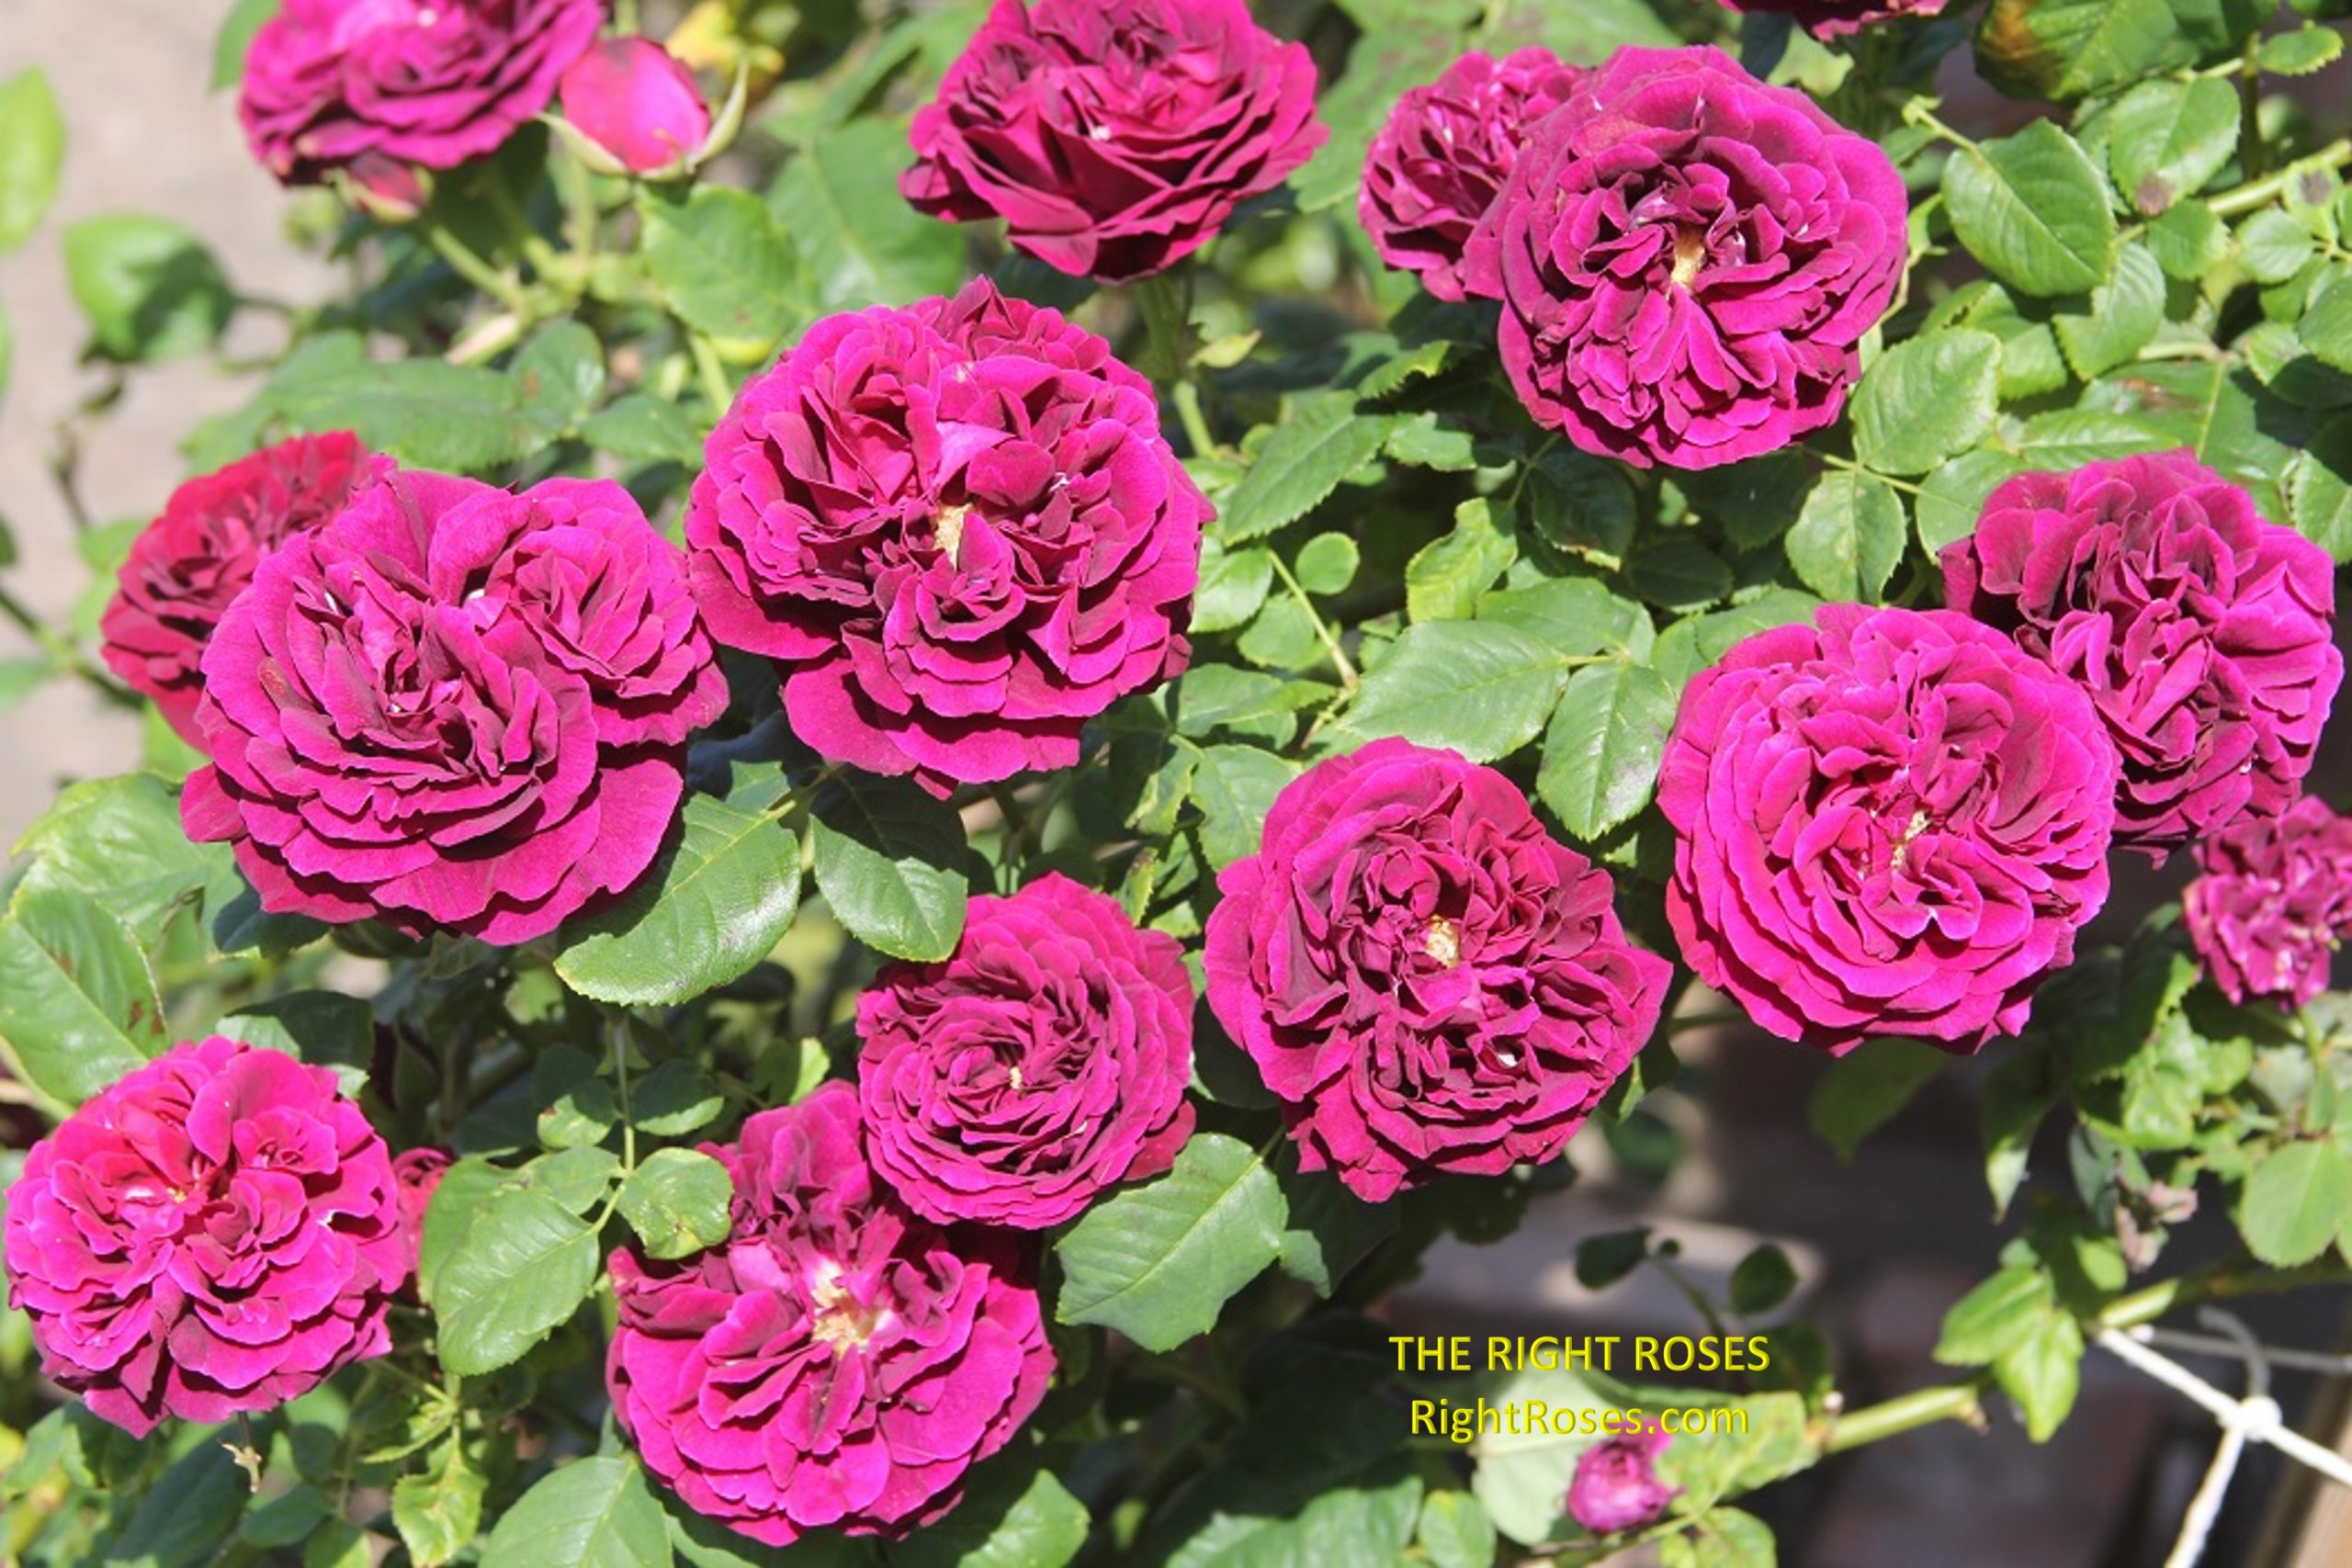 The Right Roses presents you with the best rose review of rose 'Souvenir du Dr. Jamain'. Millions of gardeners from all over the world have trusted our in-depth reviews. The Right Roses team uses our own, bespoke The Right Roses Score, which is the most comprehensive rose rating system in the world, to assess the overall quality of a rose. We review all the very best roses from all the best rose breeders such as Rosen Kordes, Rosen Tantau, Delbard, David Austin Roses. The Right Roses is also running the best gardening club for the very best connoisseur gardeners and garden designers at Righttify.com. At Righttify.com, connoisseur sellers can design gardens, provide gardening services, and provide garden consulting services.